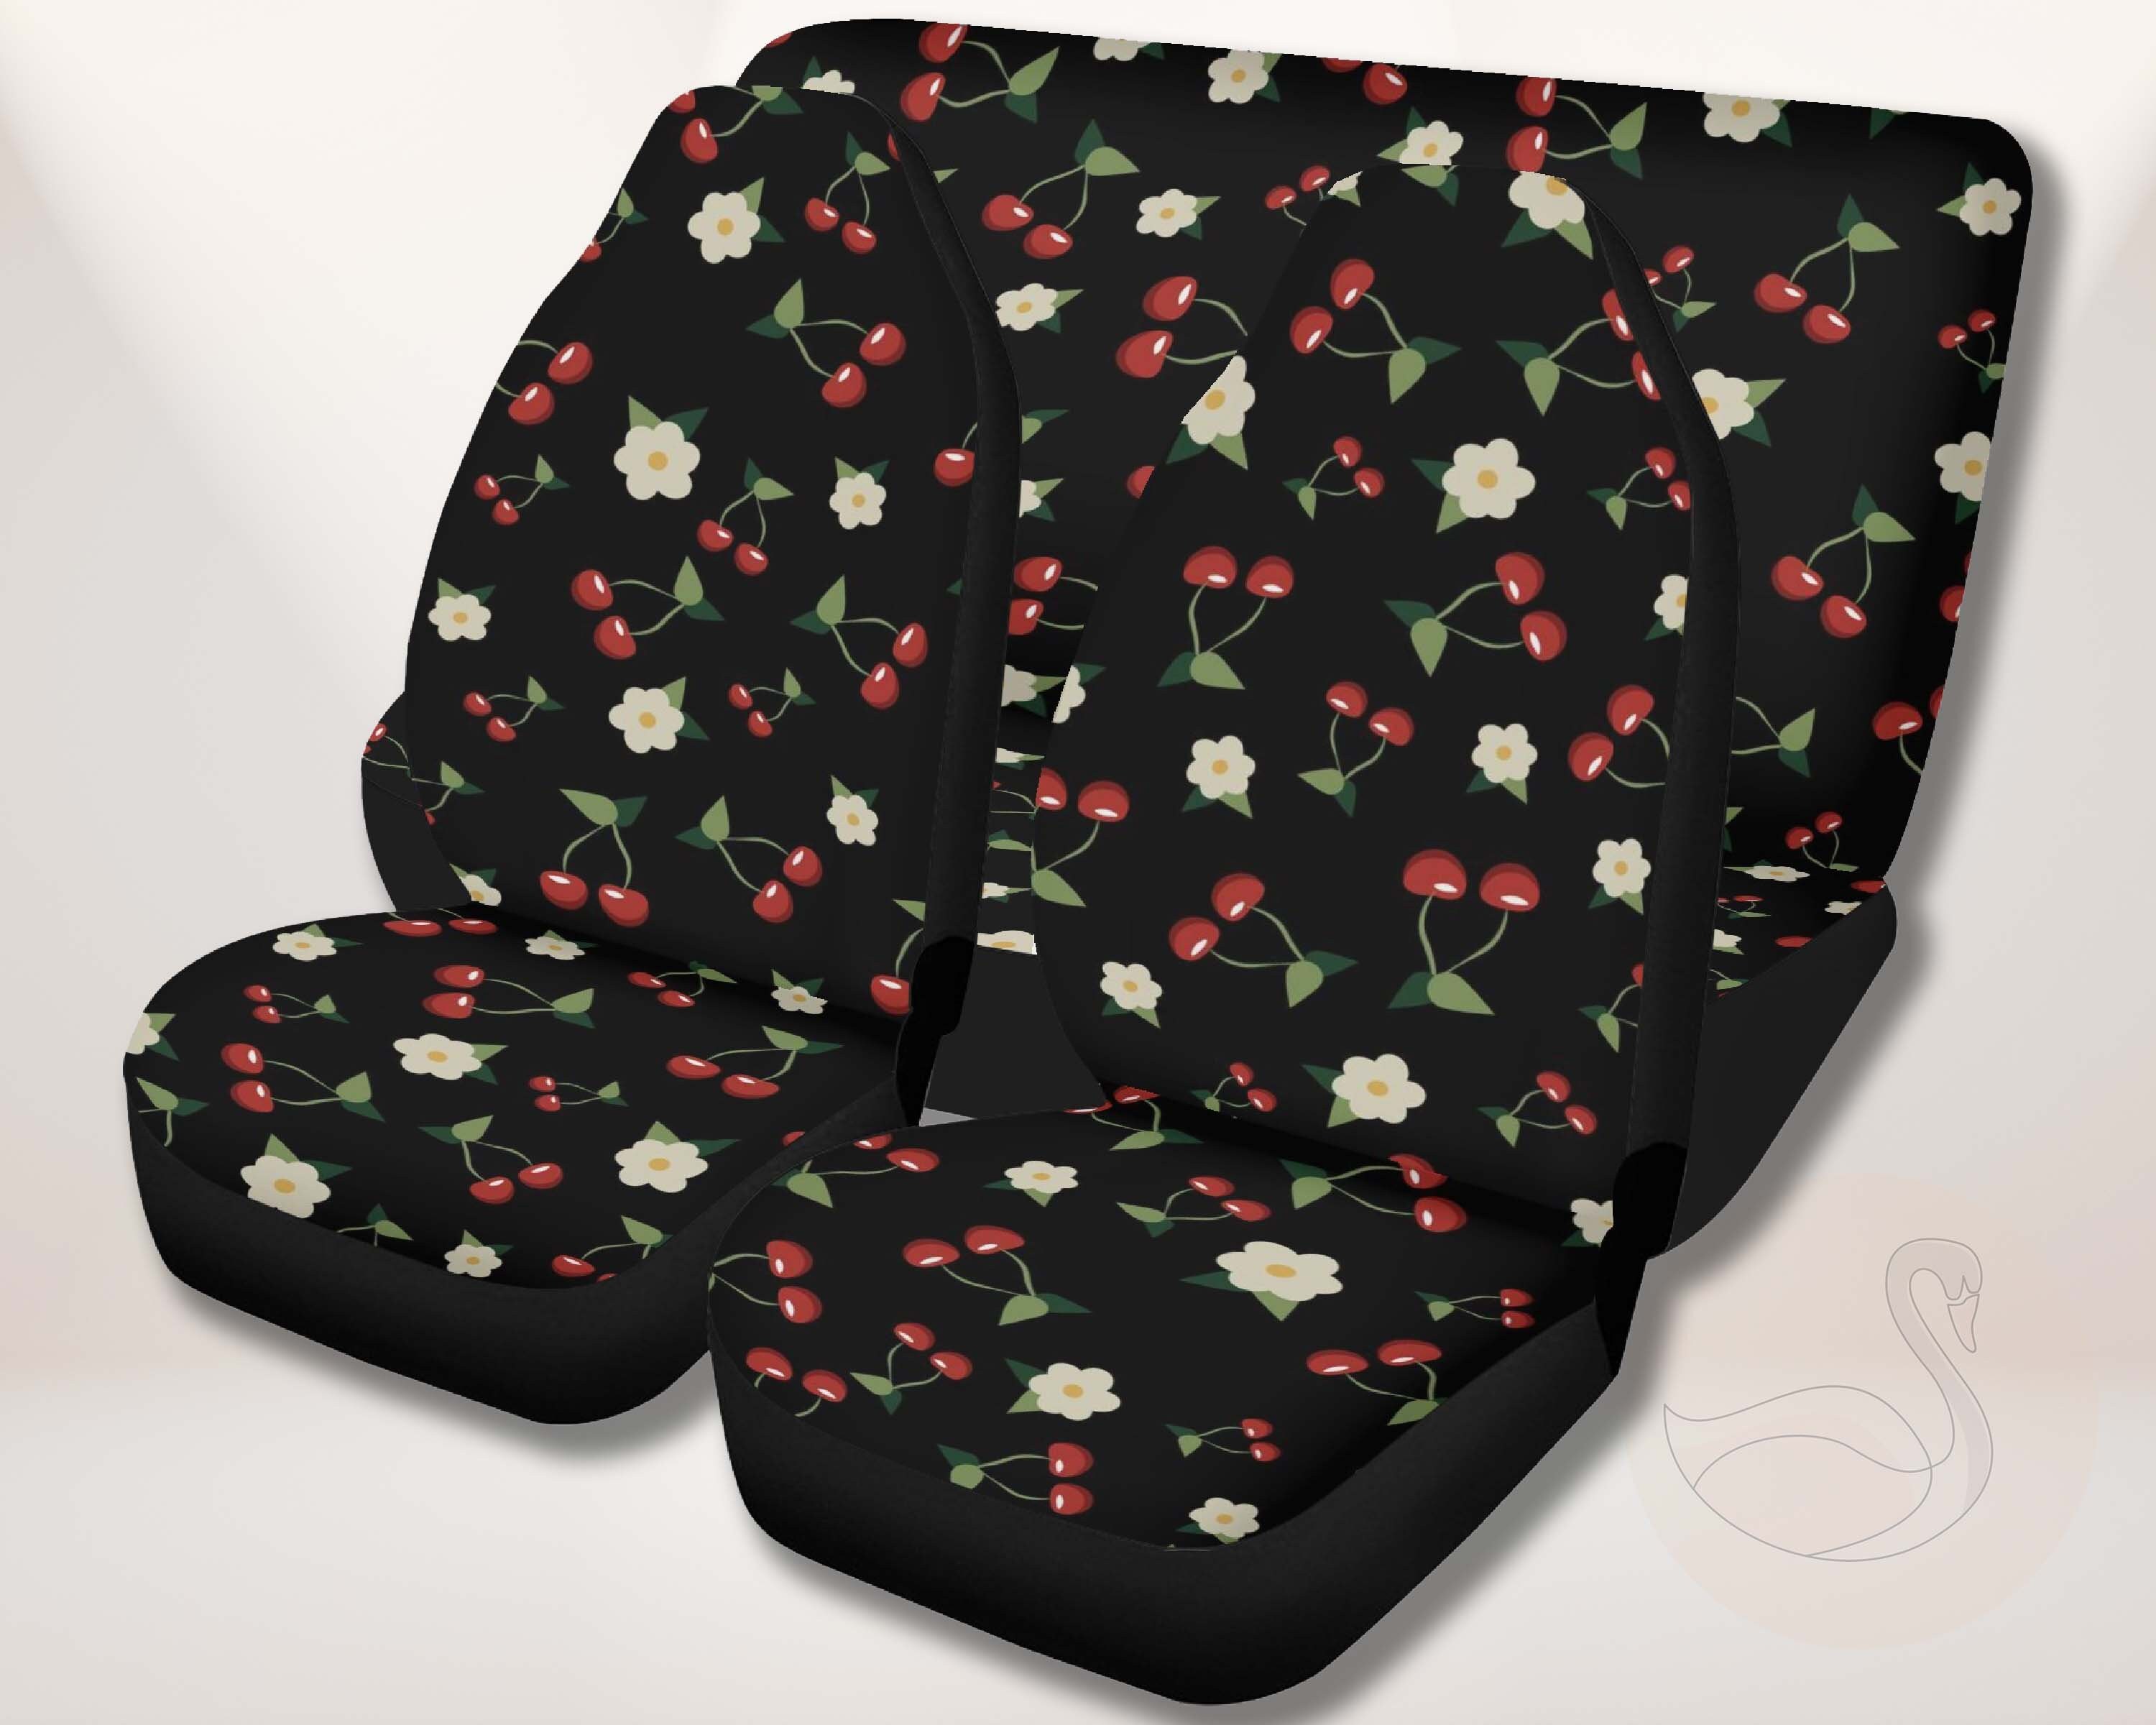 Cherry Seat Car Seat Covers, Cute Seat Cover for Car Full Set for Women